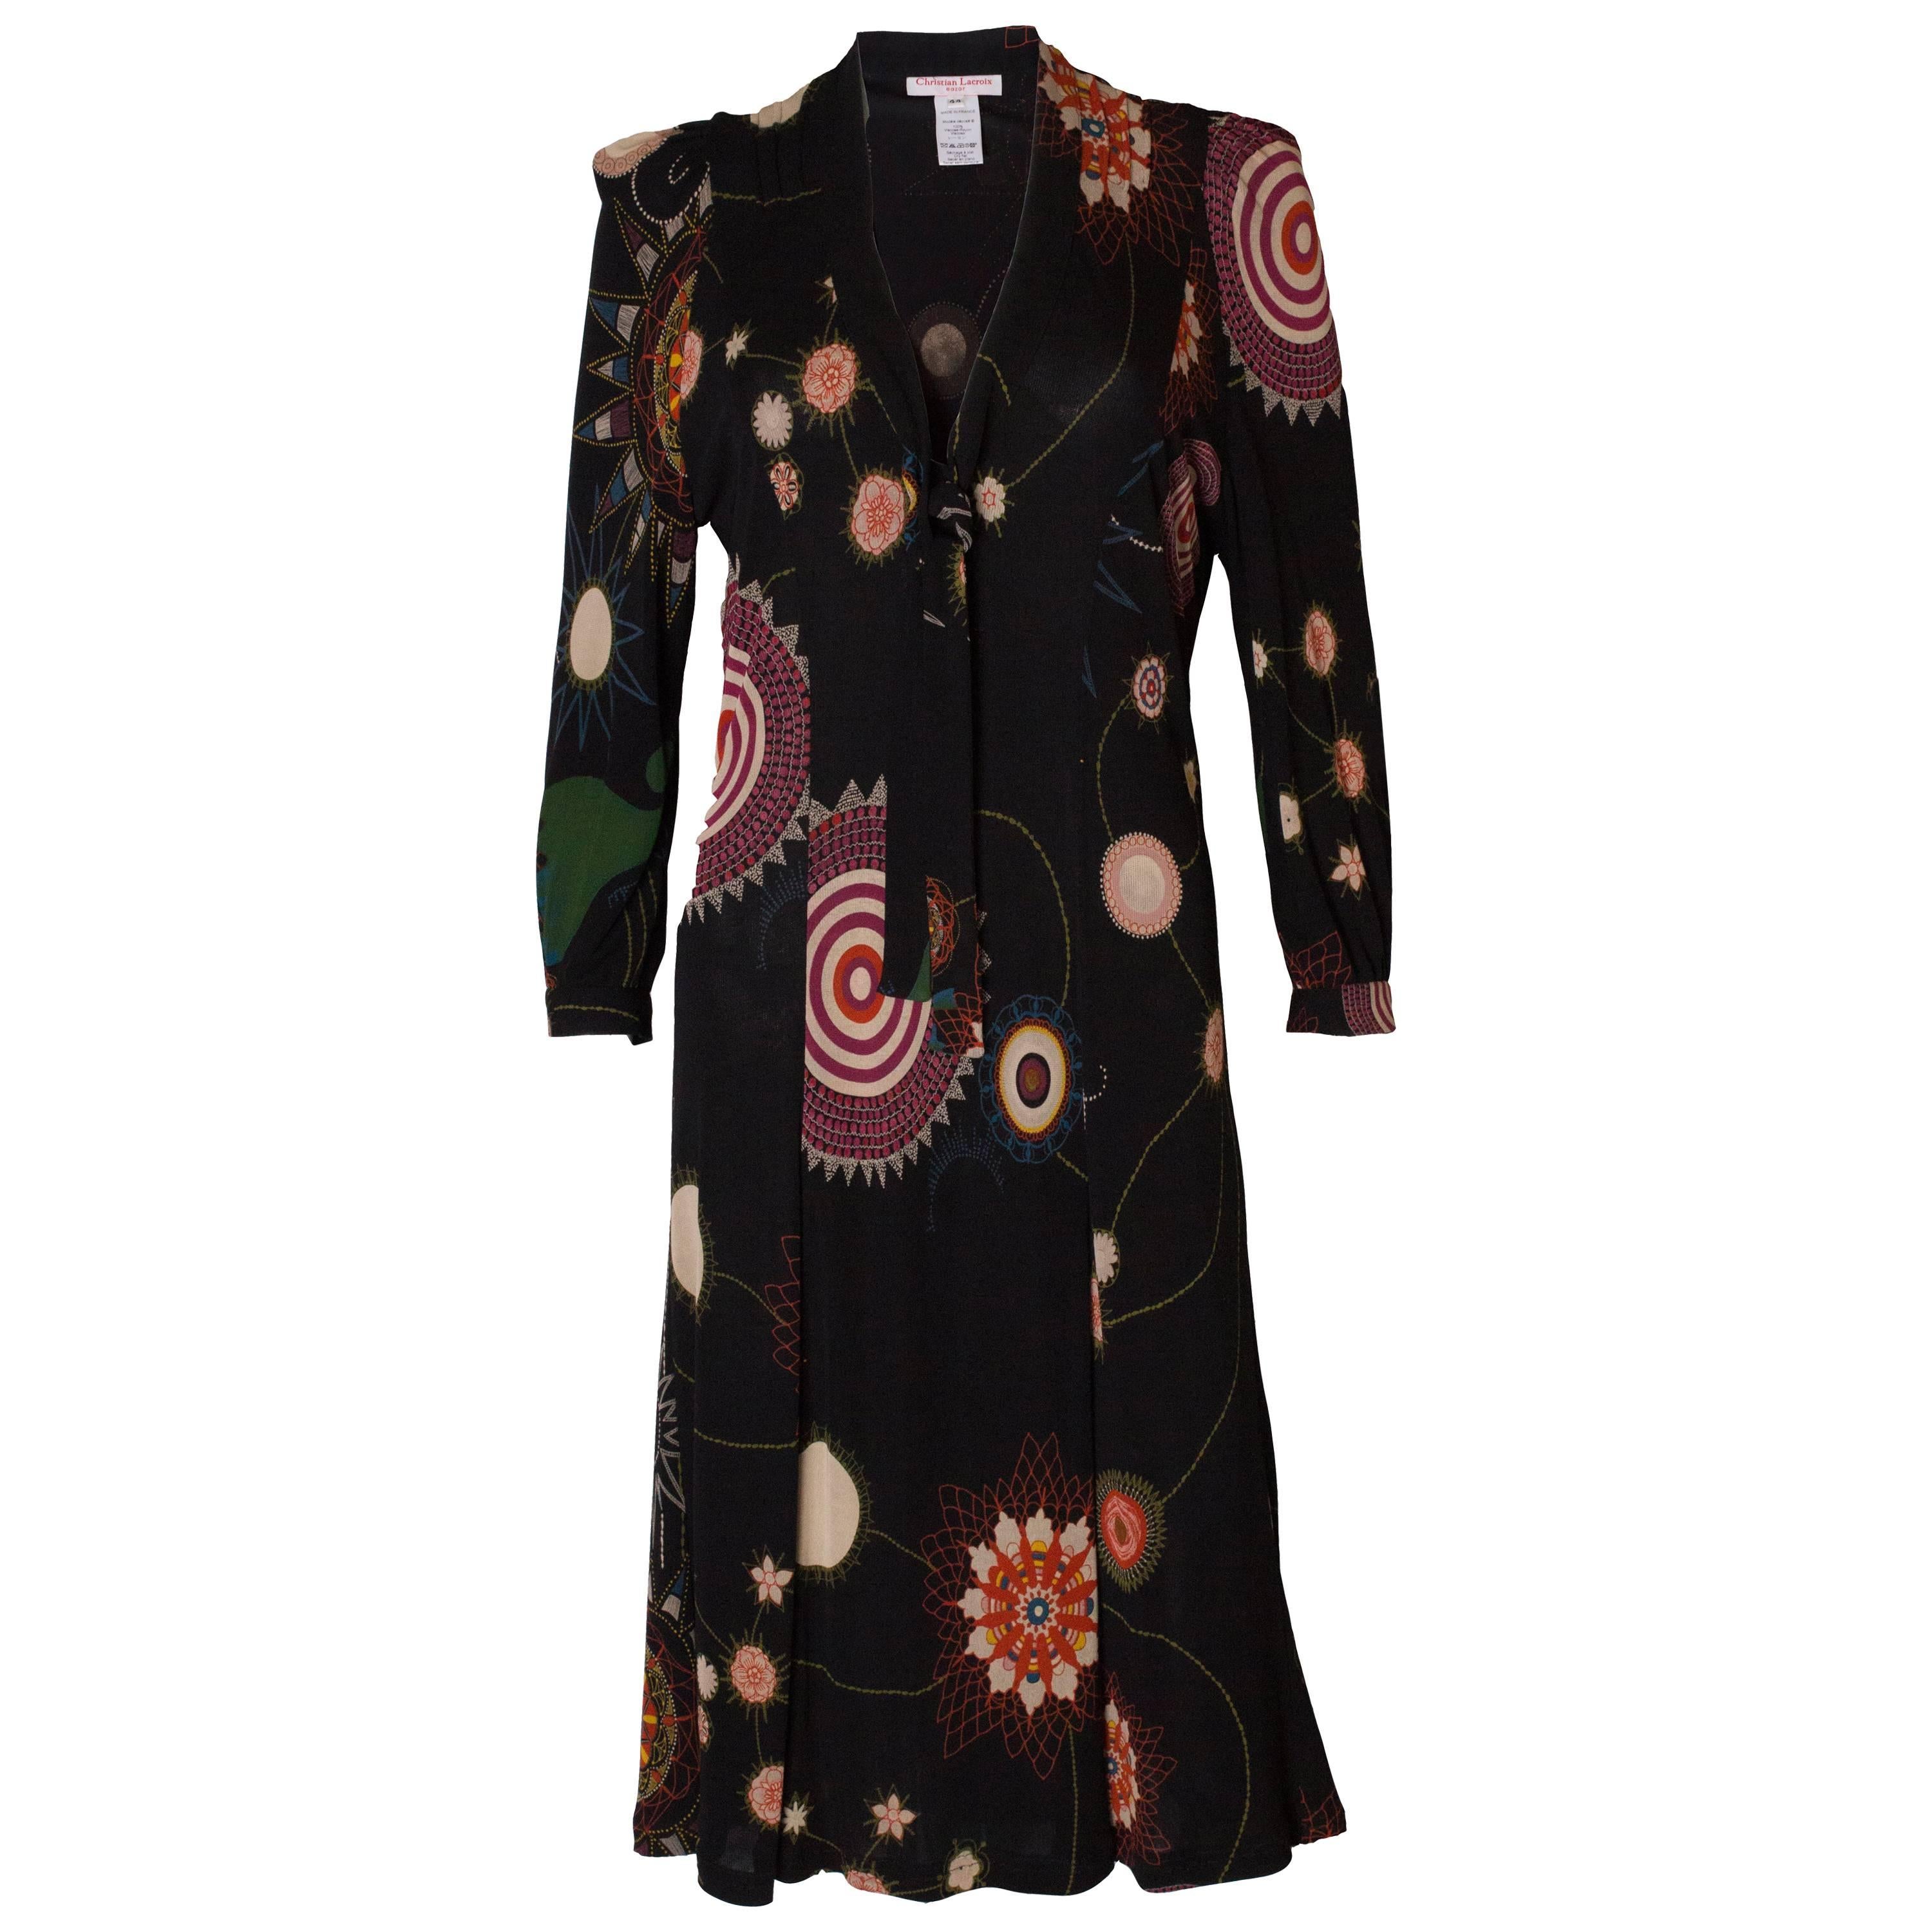 A Vintage 2000 printed  Dress by Christian Lacroix